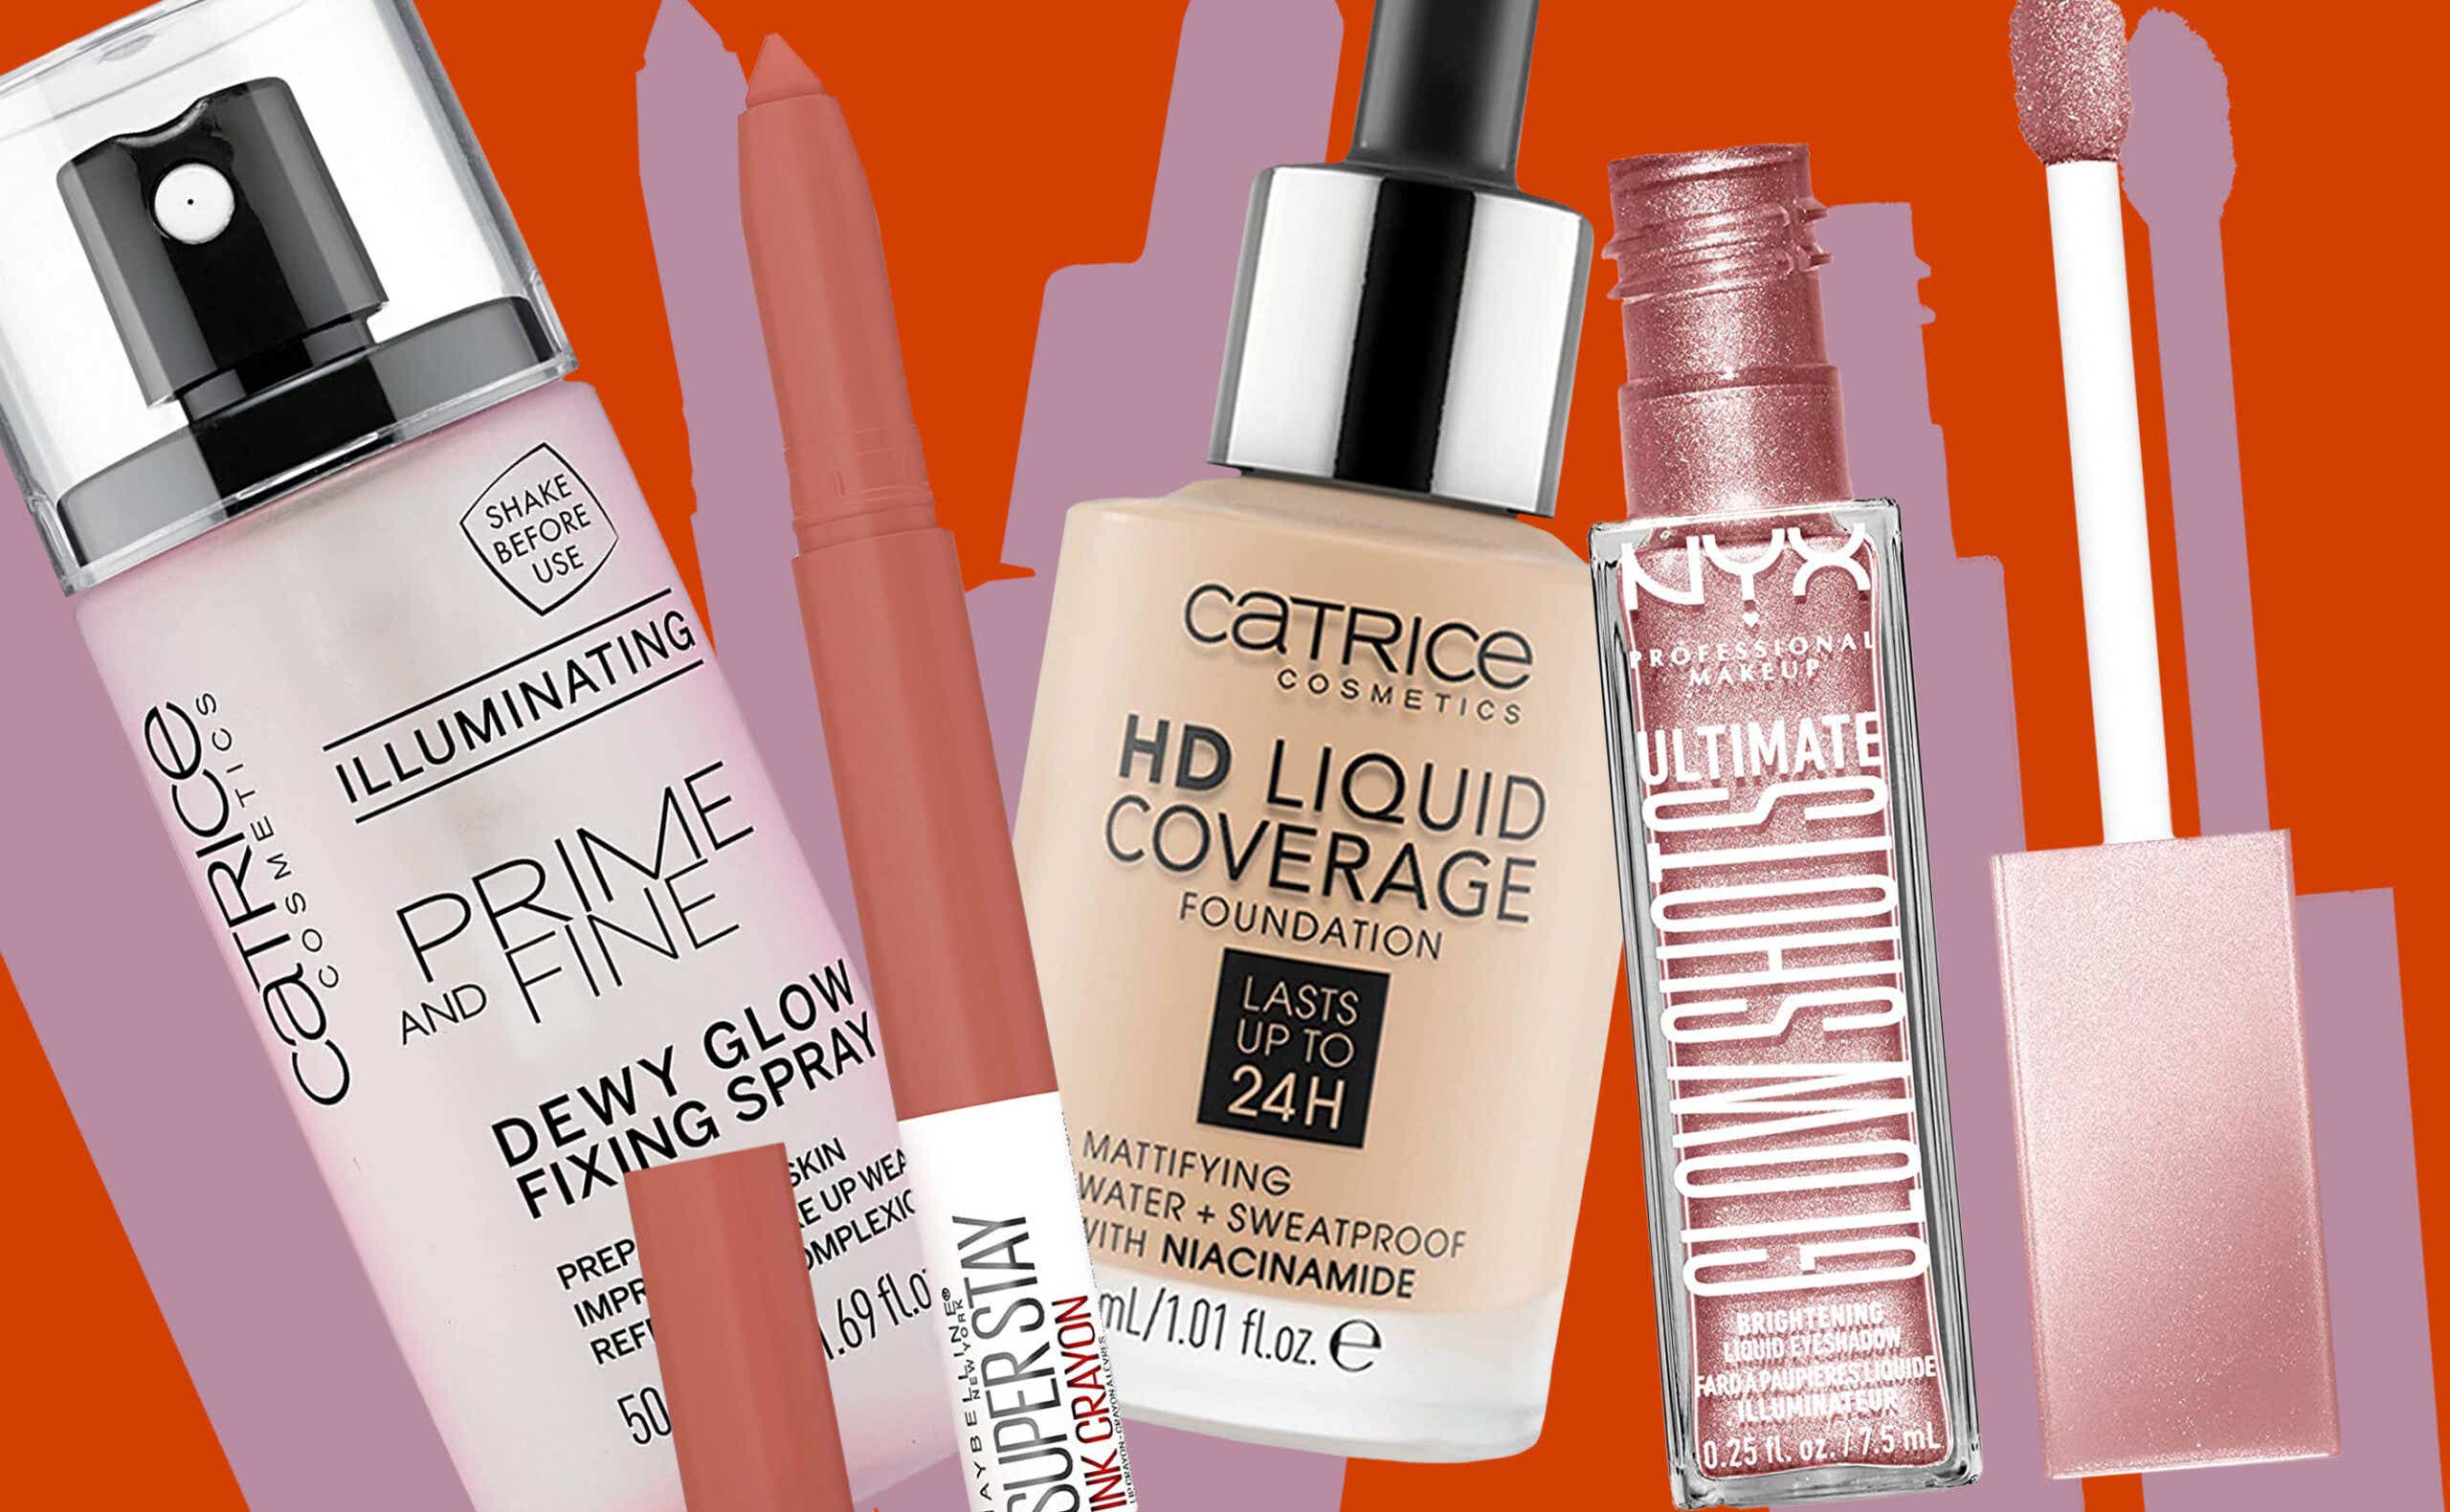 Catrice Cosmetics: Quality Makeup & Beauty Products- Affordable